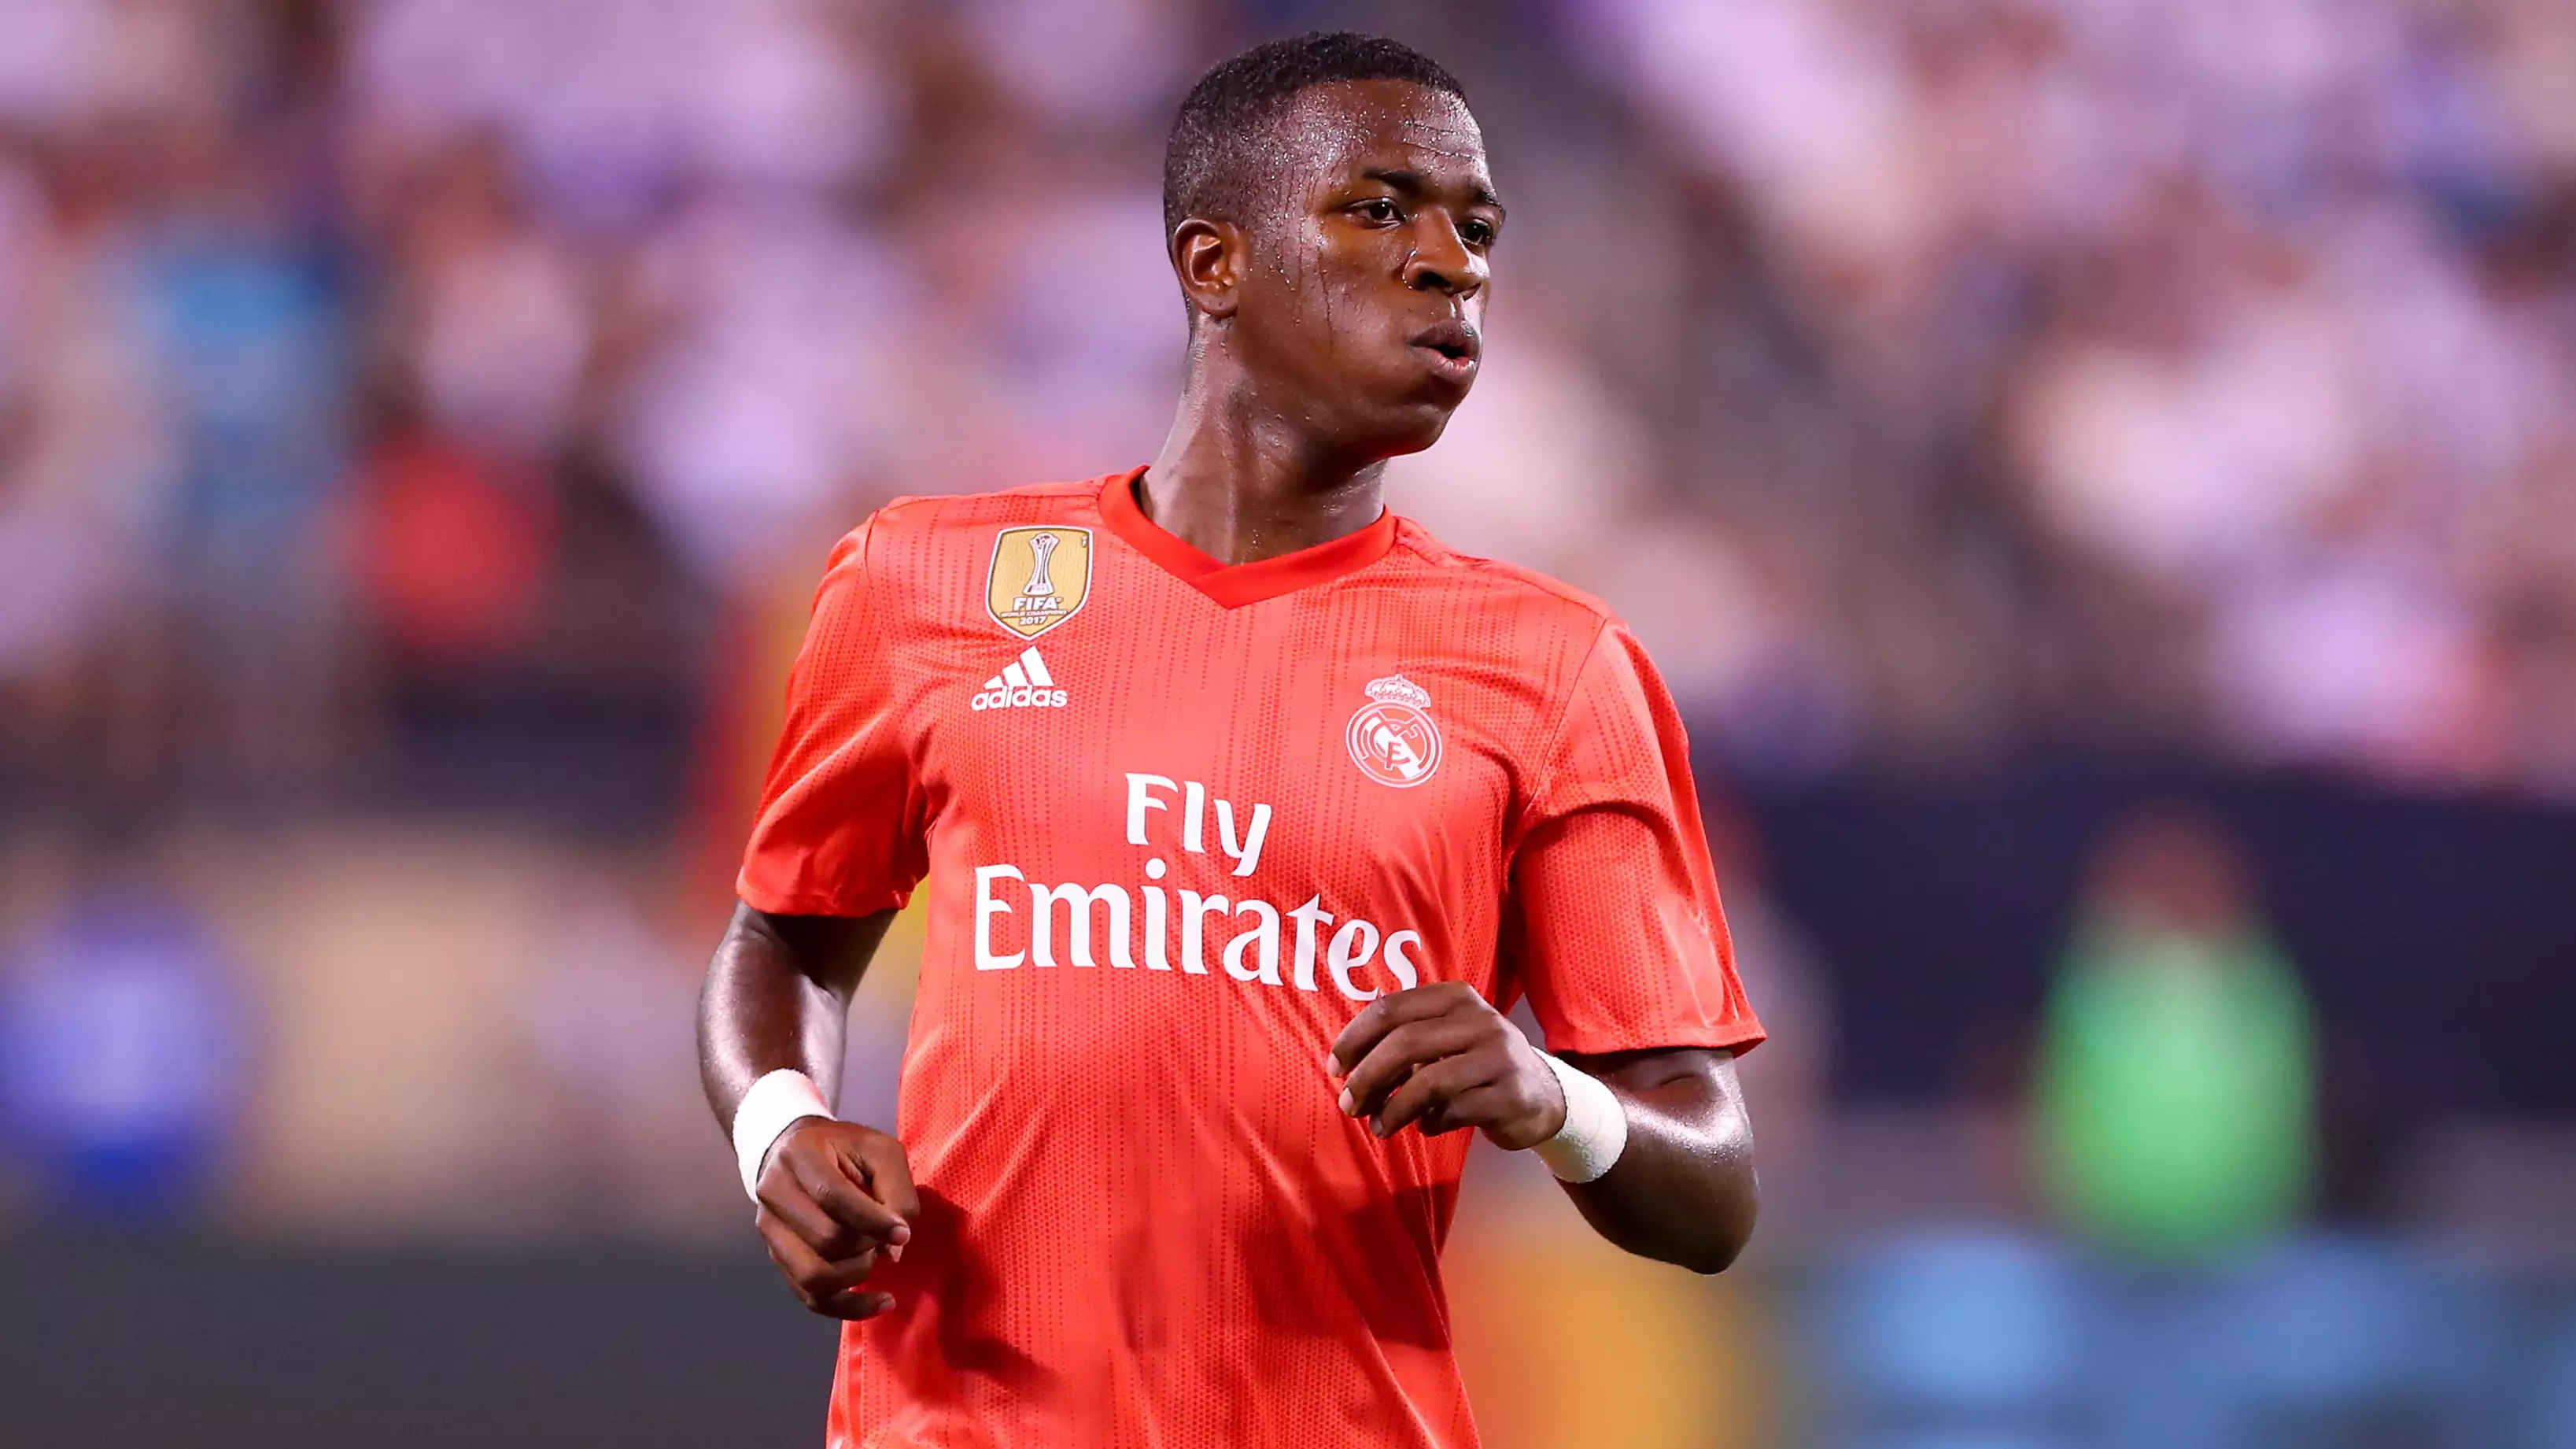 Real Madrid Youngster Vinícius Júnior Included In Champions League Squad